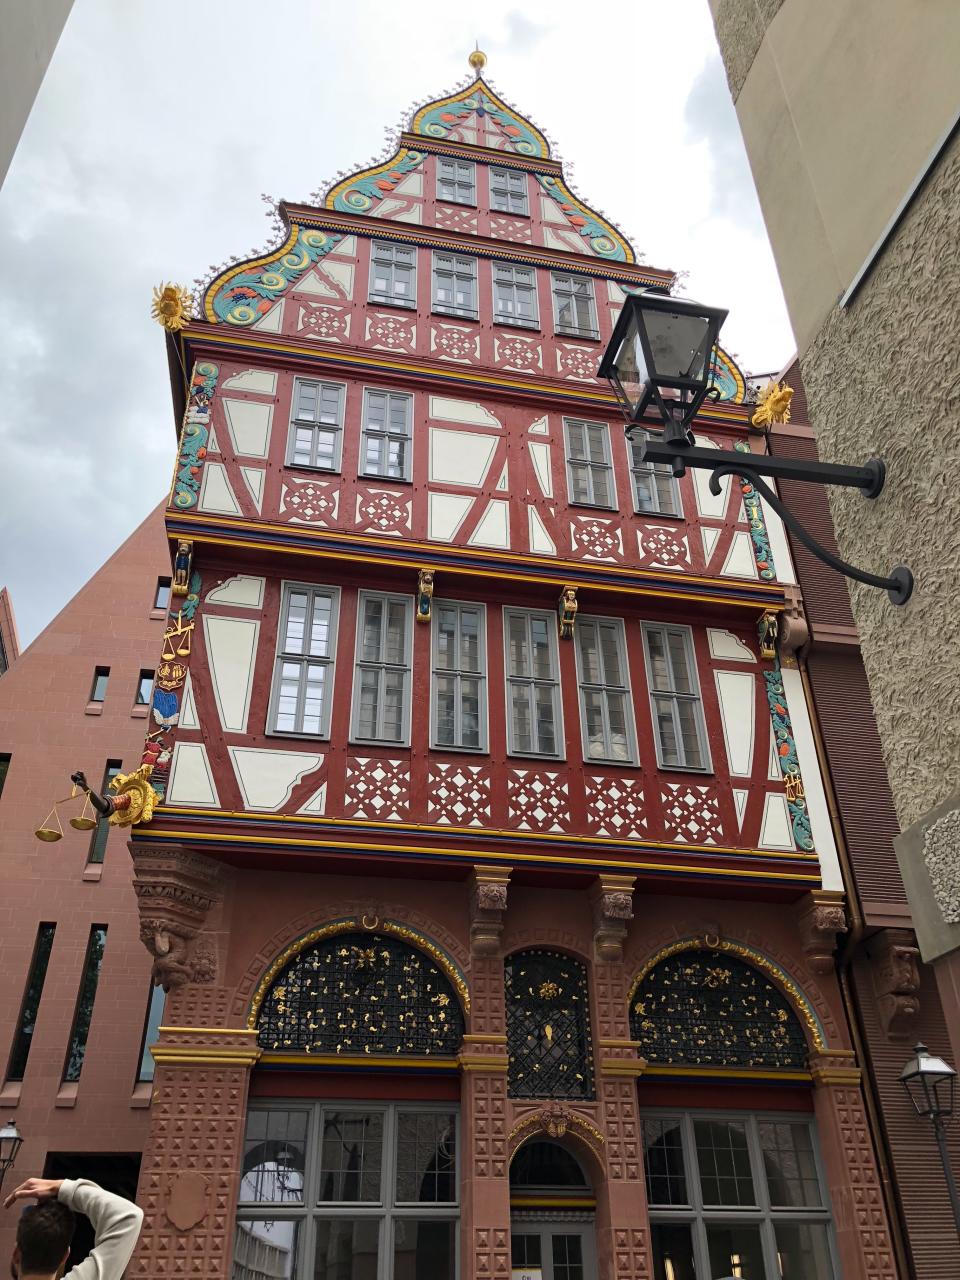 The Haus zur Goldenen Waage, or the “house of the golden scales,” was rebuilt as a replica of the 1618 original and is thought to be the most important building rebuilt during the project.